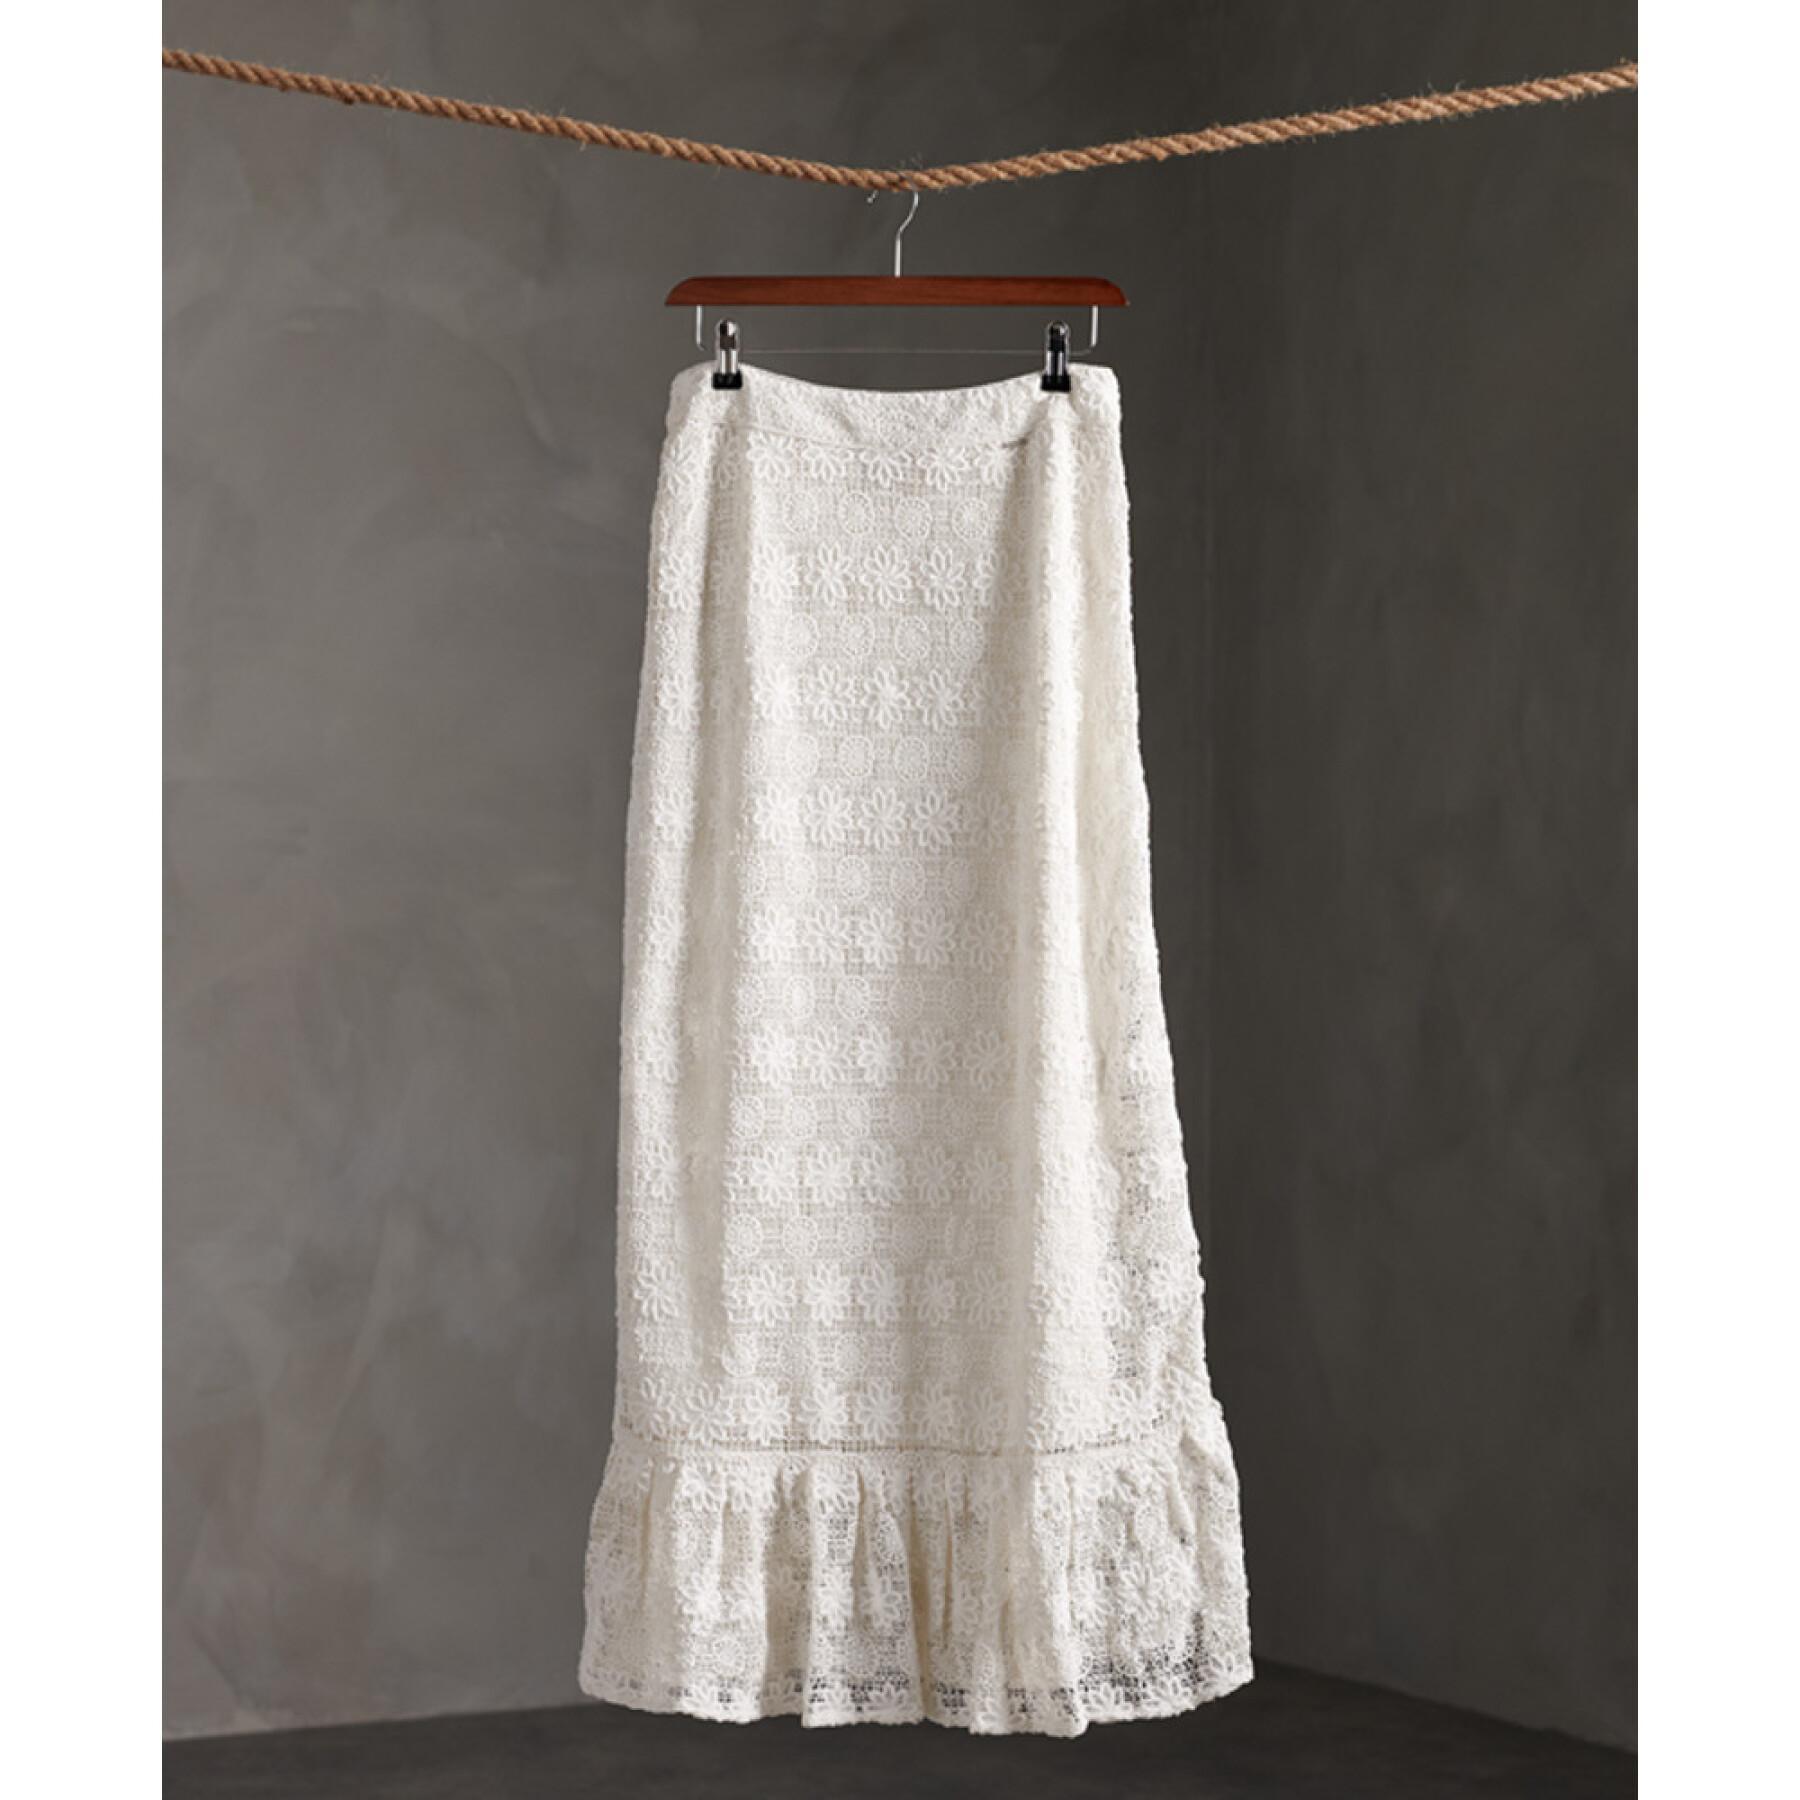 Long lace skirt for women Superdry Morgan